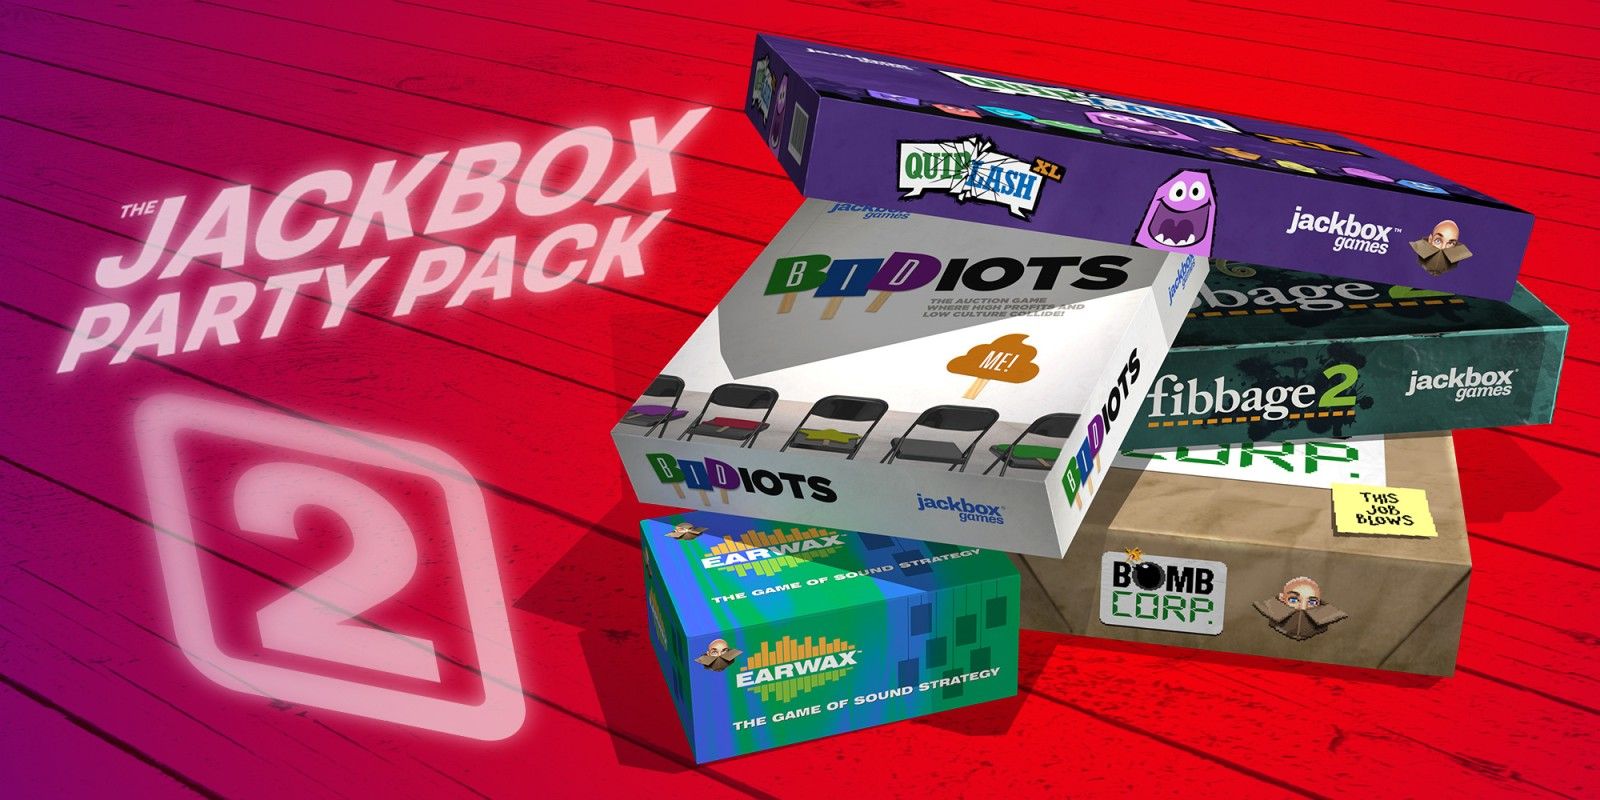 Poster for the Jackbox Party Pack 2